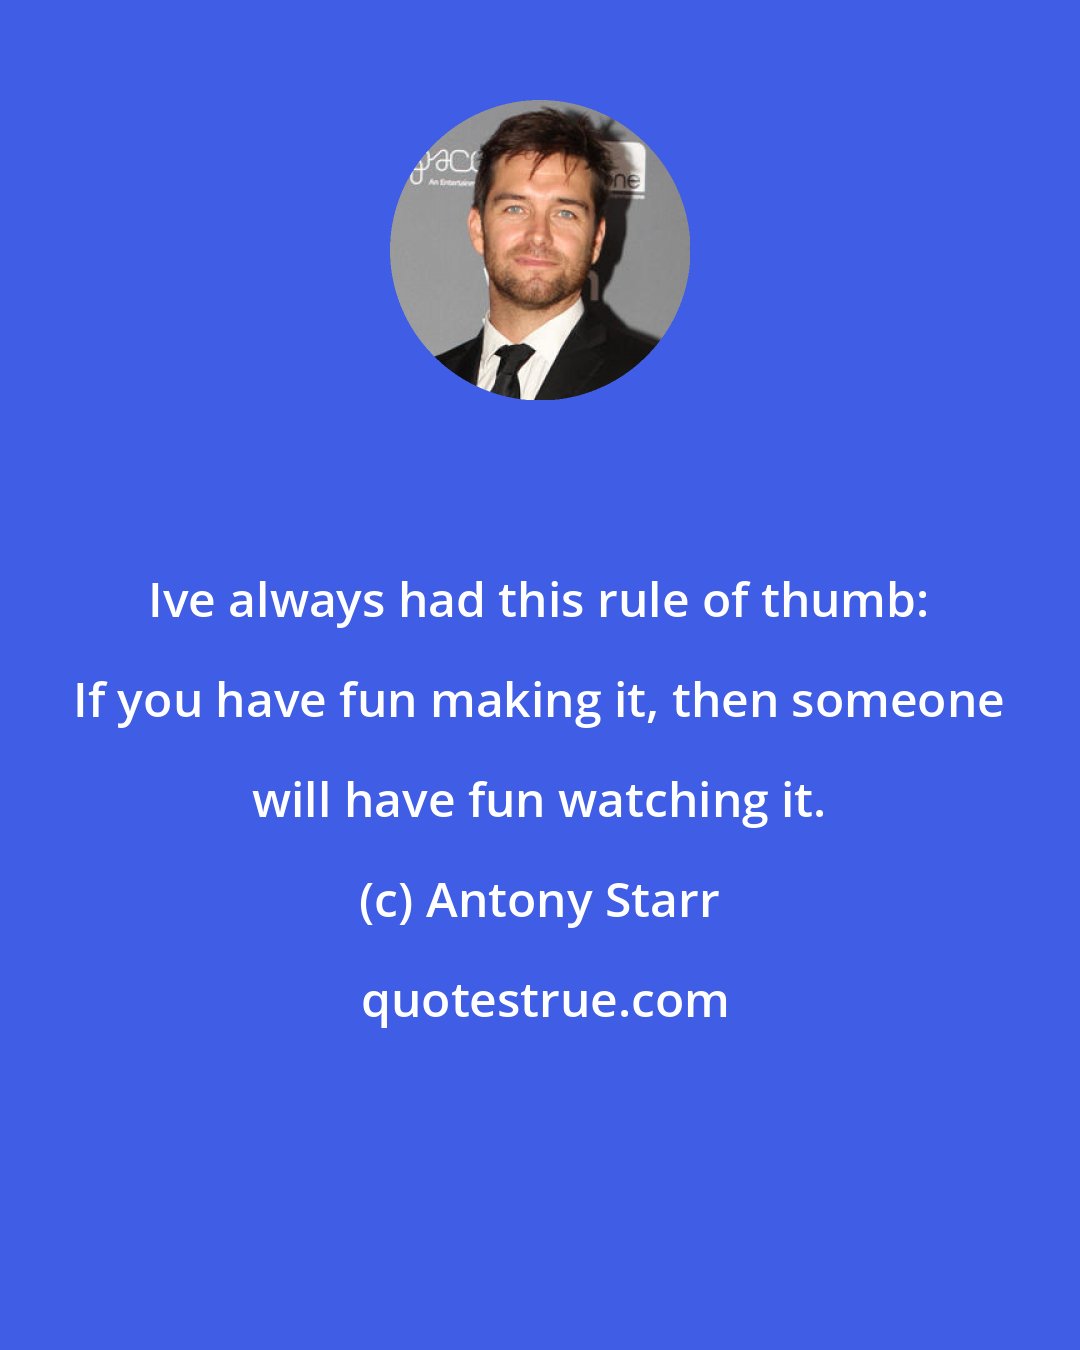 Antony Starr: Ive always had this rule of thumb: If you have fun making it, then someone will have fun watching it.